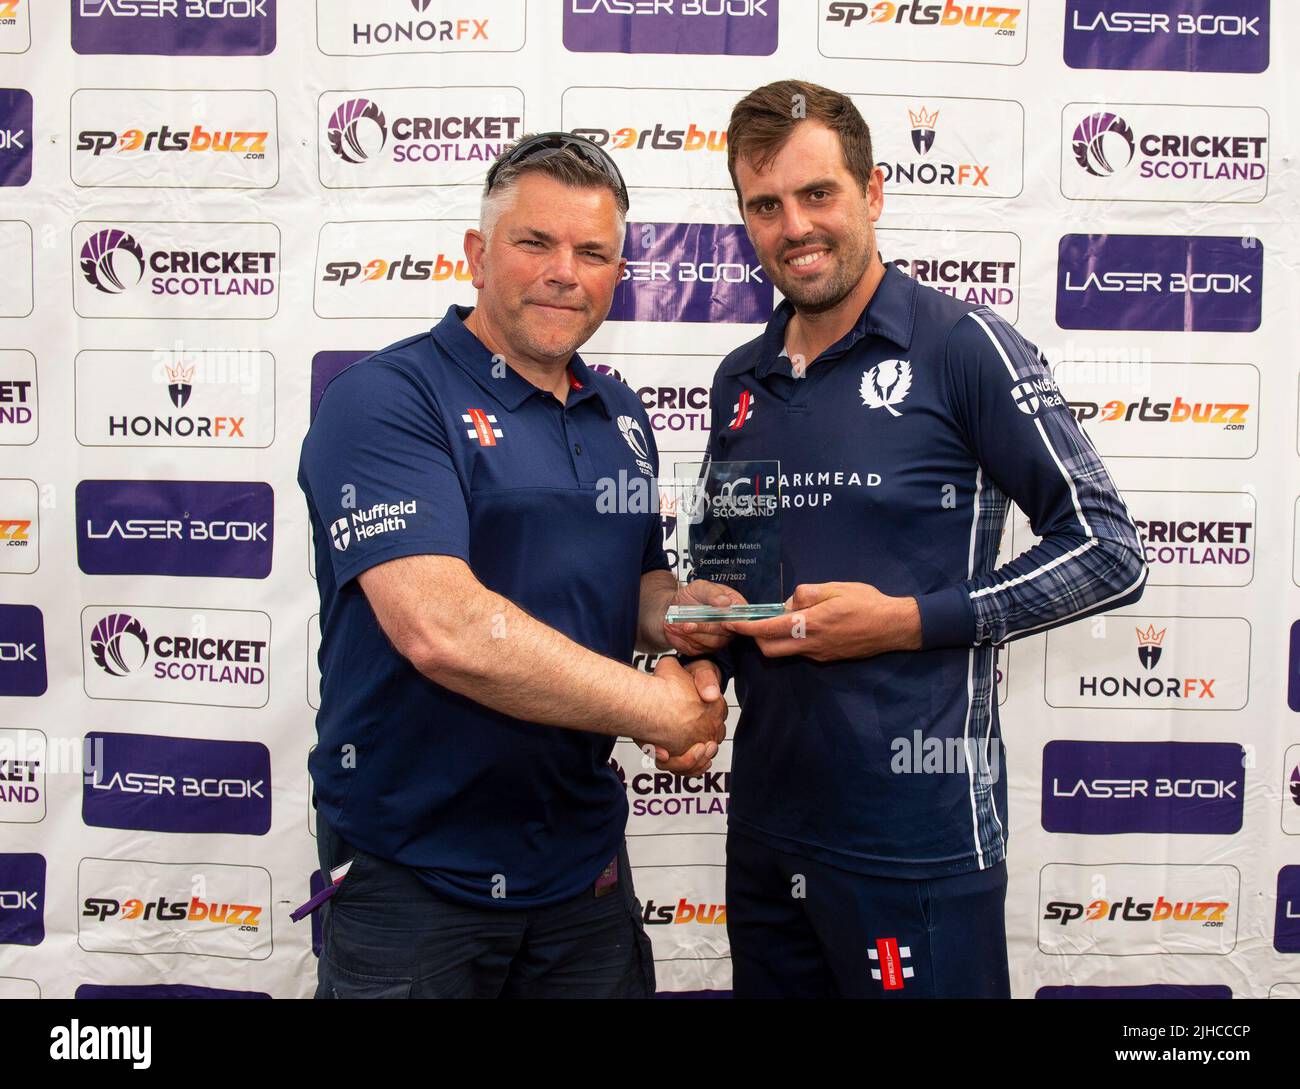 ICC Men's Cricket World Cup League 2 - Scotland v, Nepal. 17th July, 2022. Scotland take on Nepal for the second time in the ICC Div 2 Men's Cricket World Cup League 2 at Titwood, Glasgow. Pic shows: Scotland's Calum MacLeod receives the player of the match award from Cricket Scotland Board member, Colin Mitchell. Credit: Ian Jacobs/Alamy Live News Stock Photo